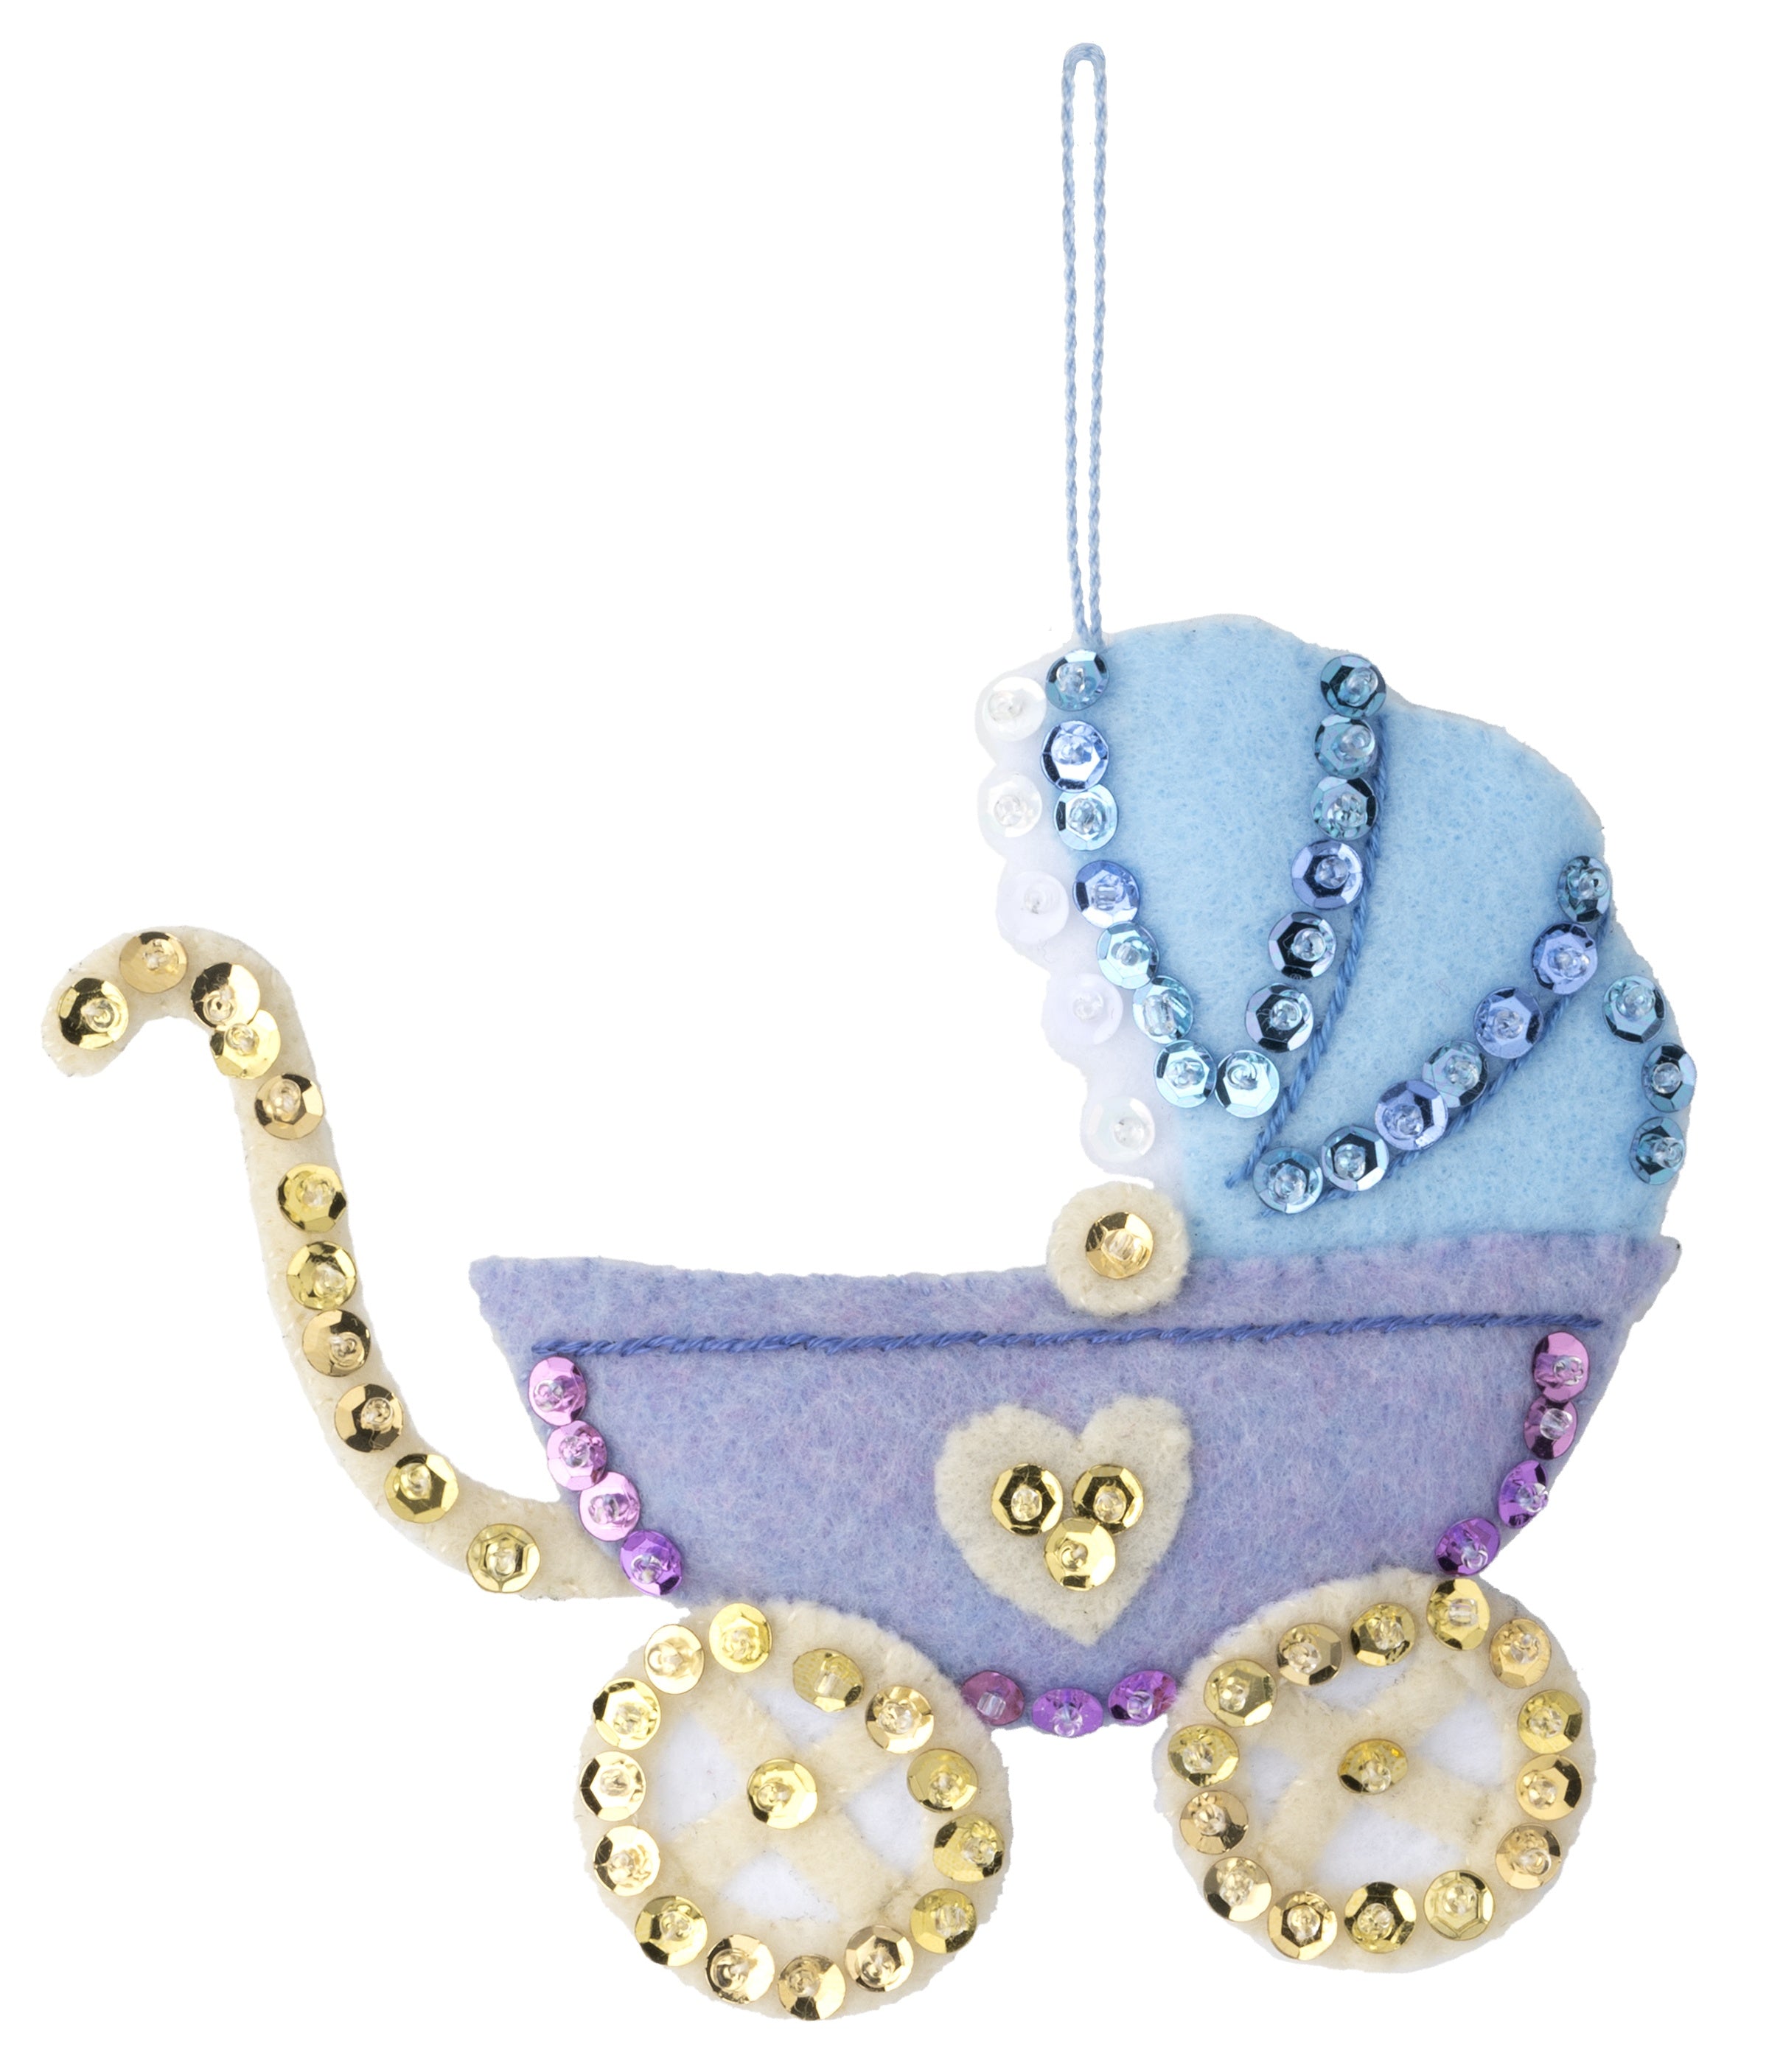 Blue and purple baby carriage.